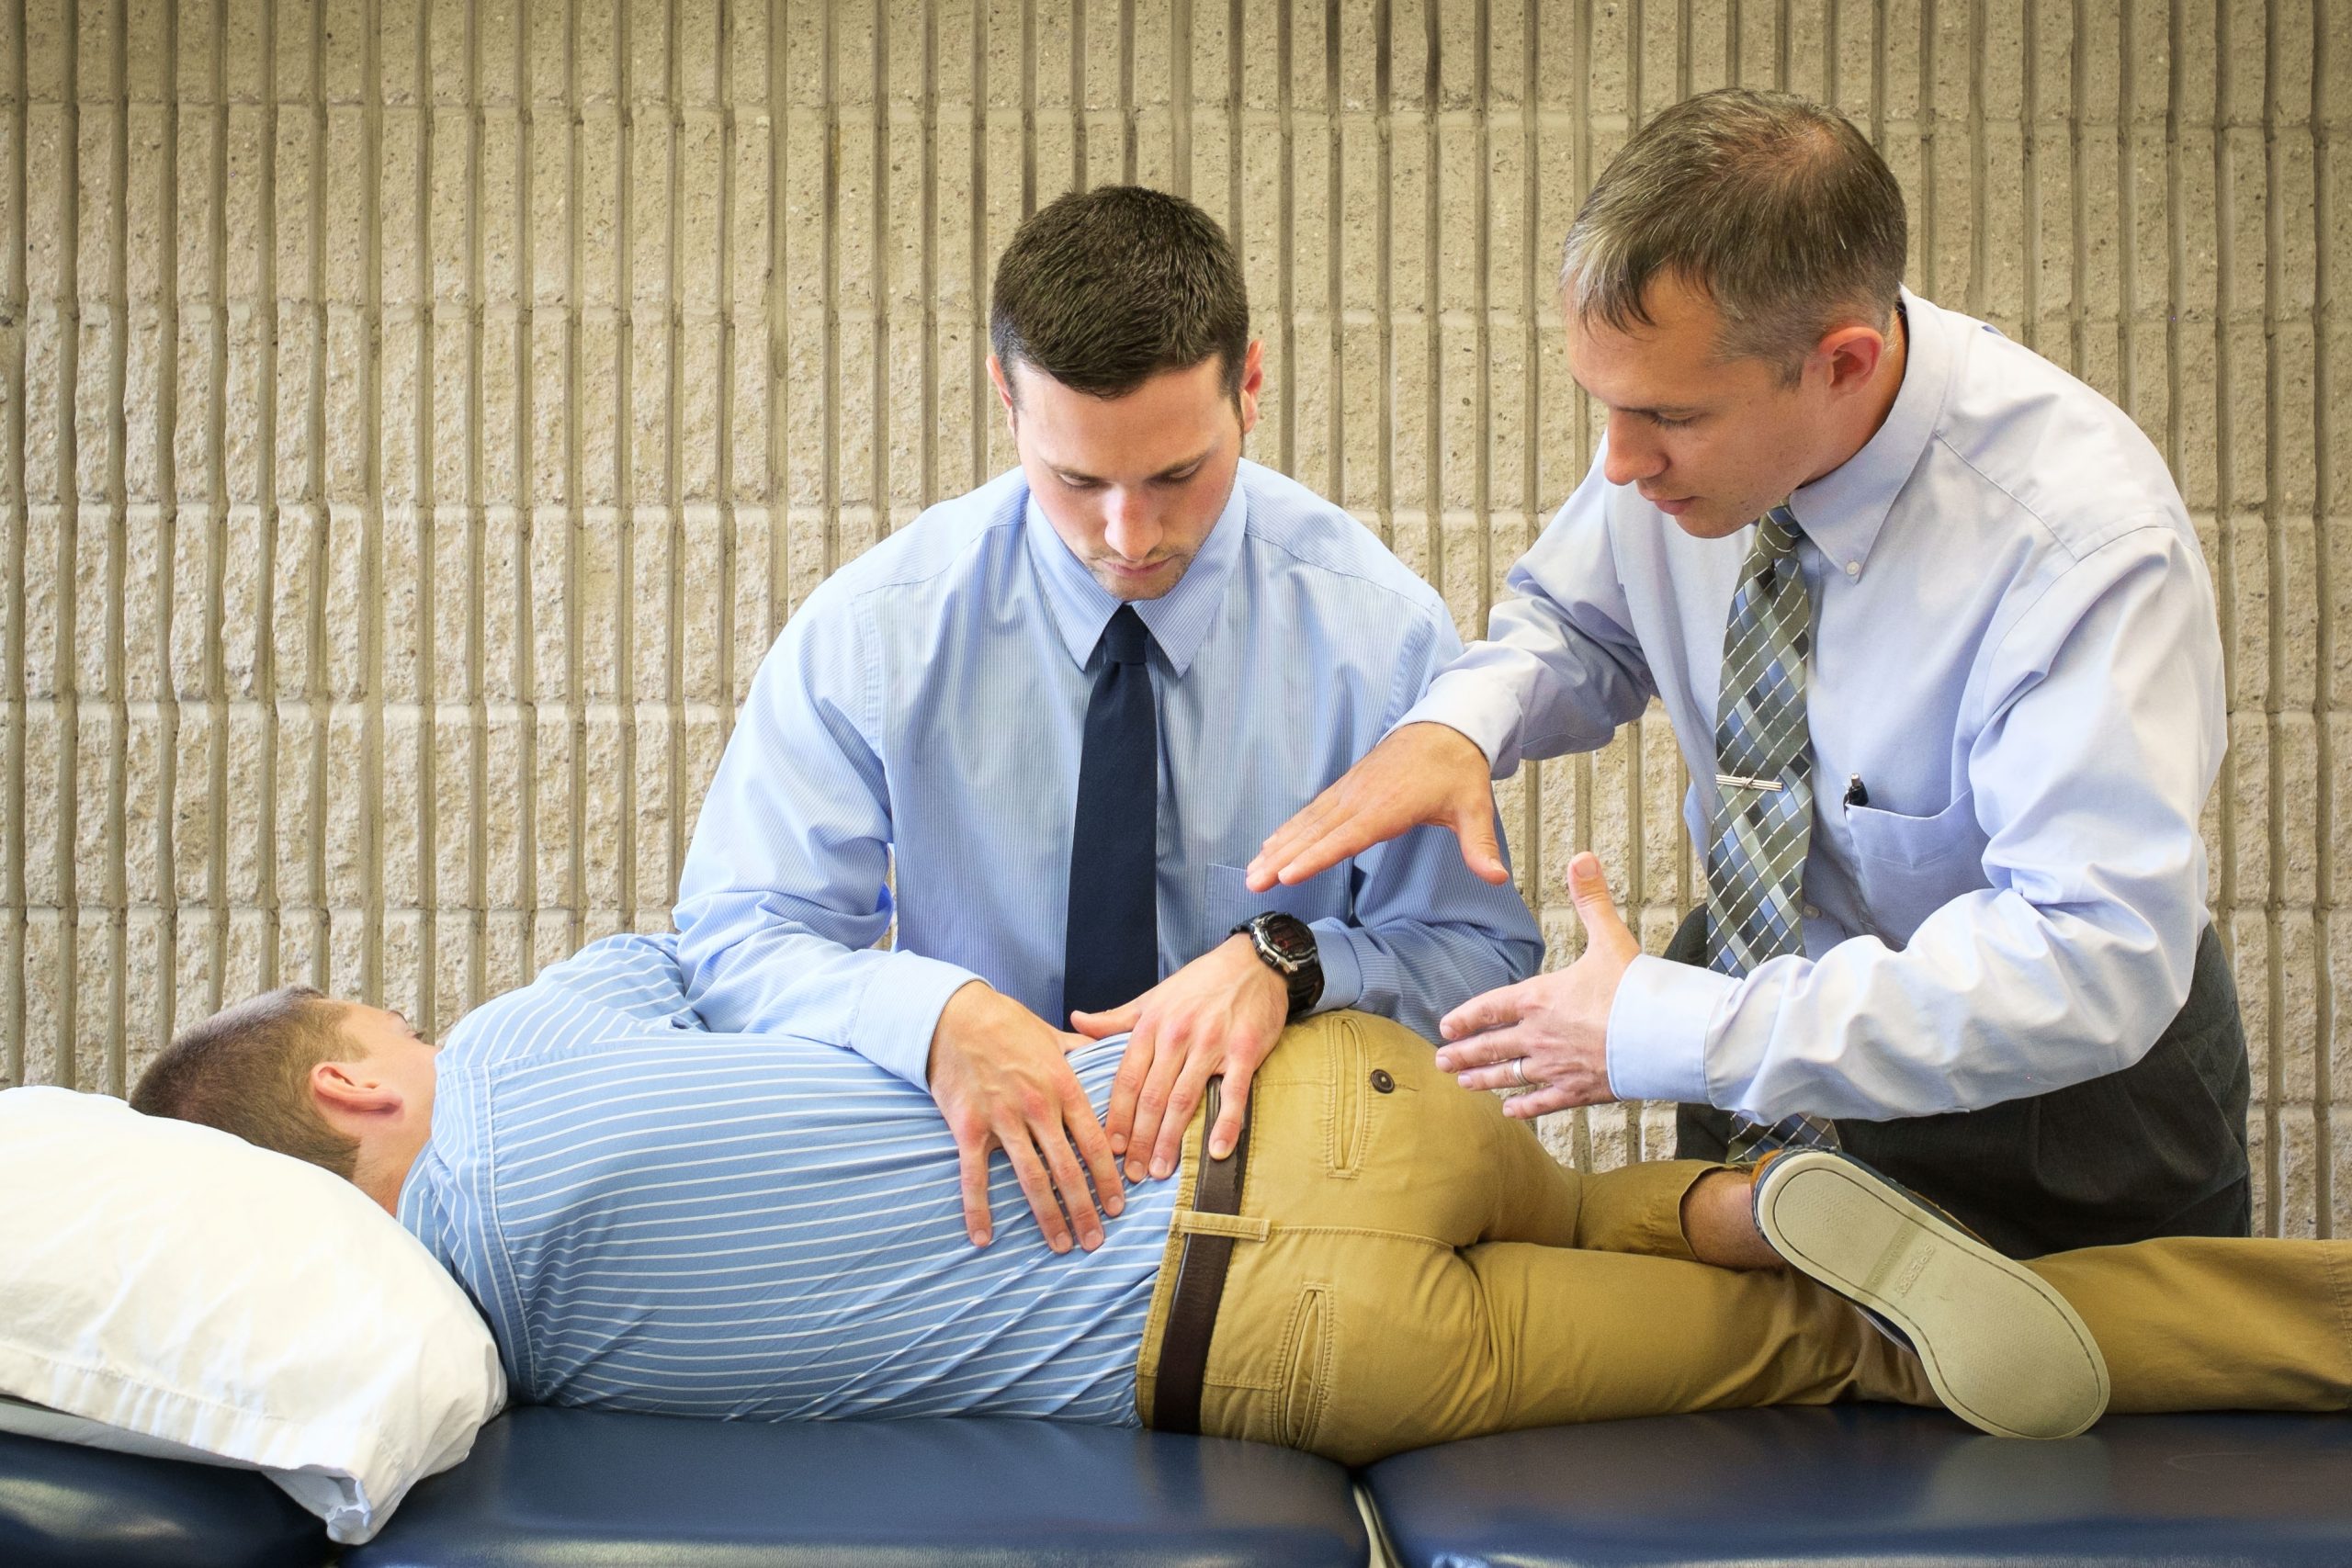 demonstrating a physical therapy exercise with faculty supervision